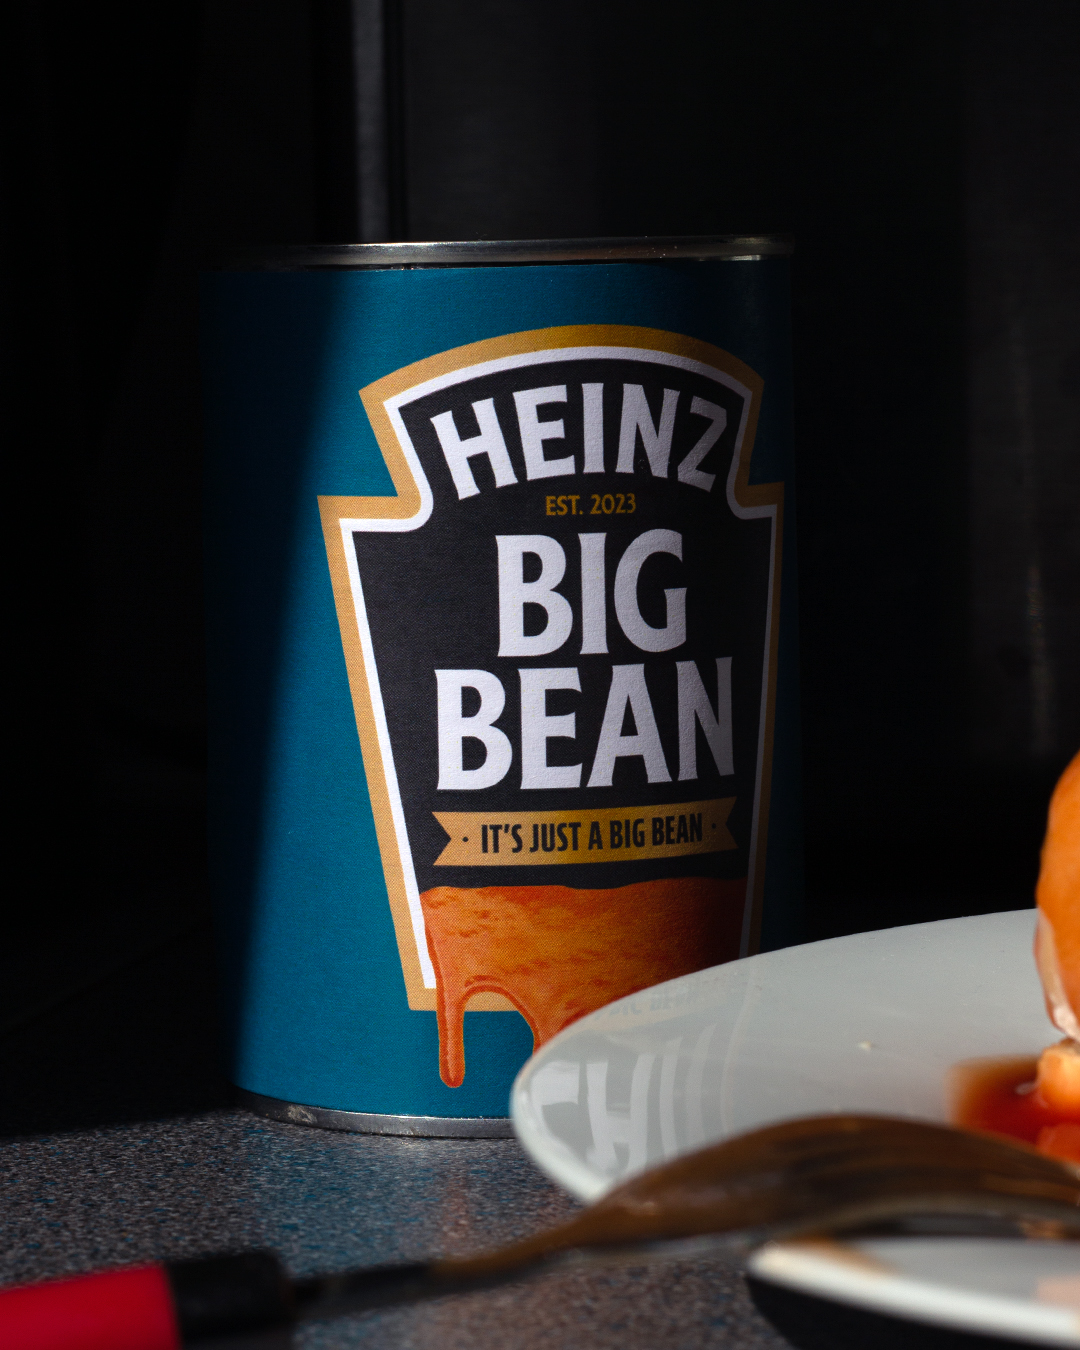 A mock up of a Heinz tin for the giant baked bean